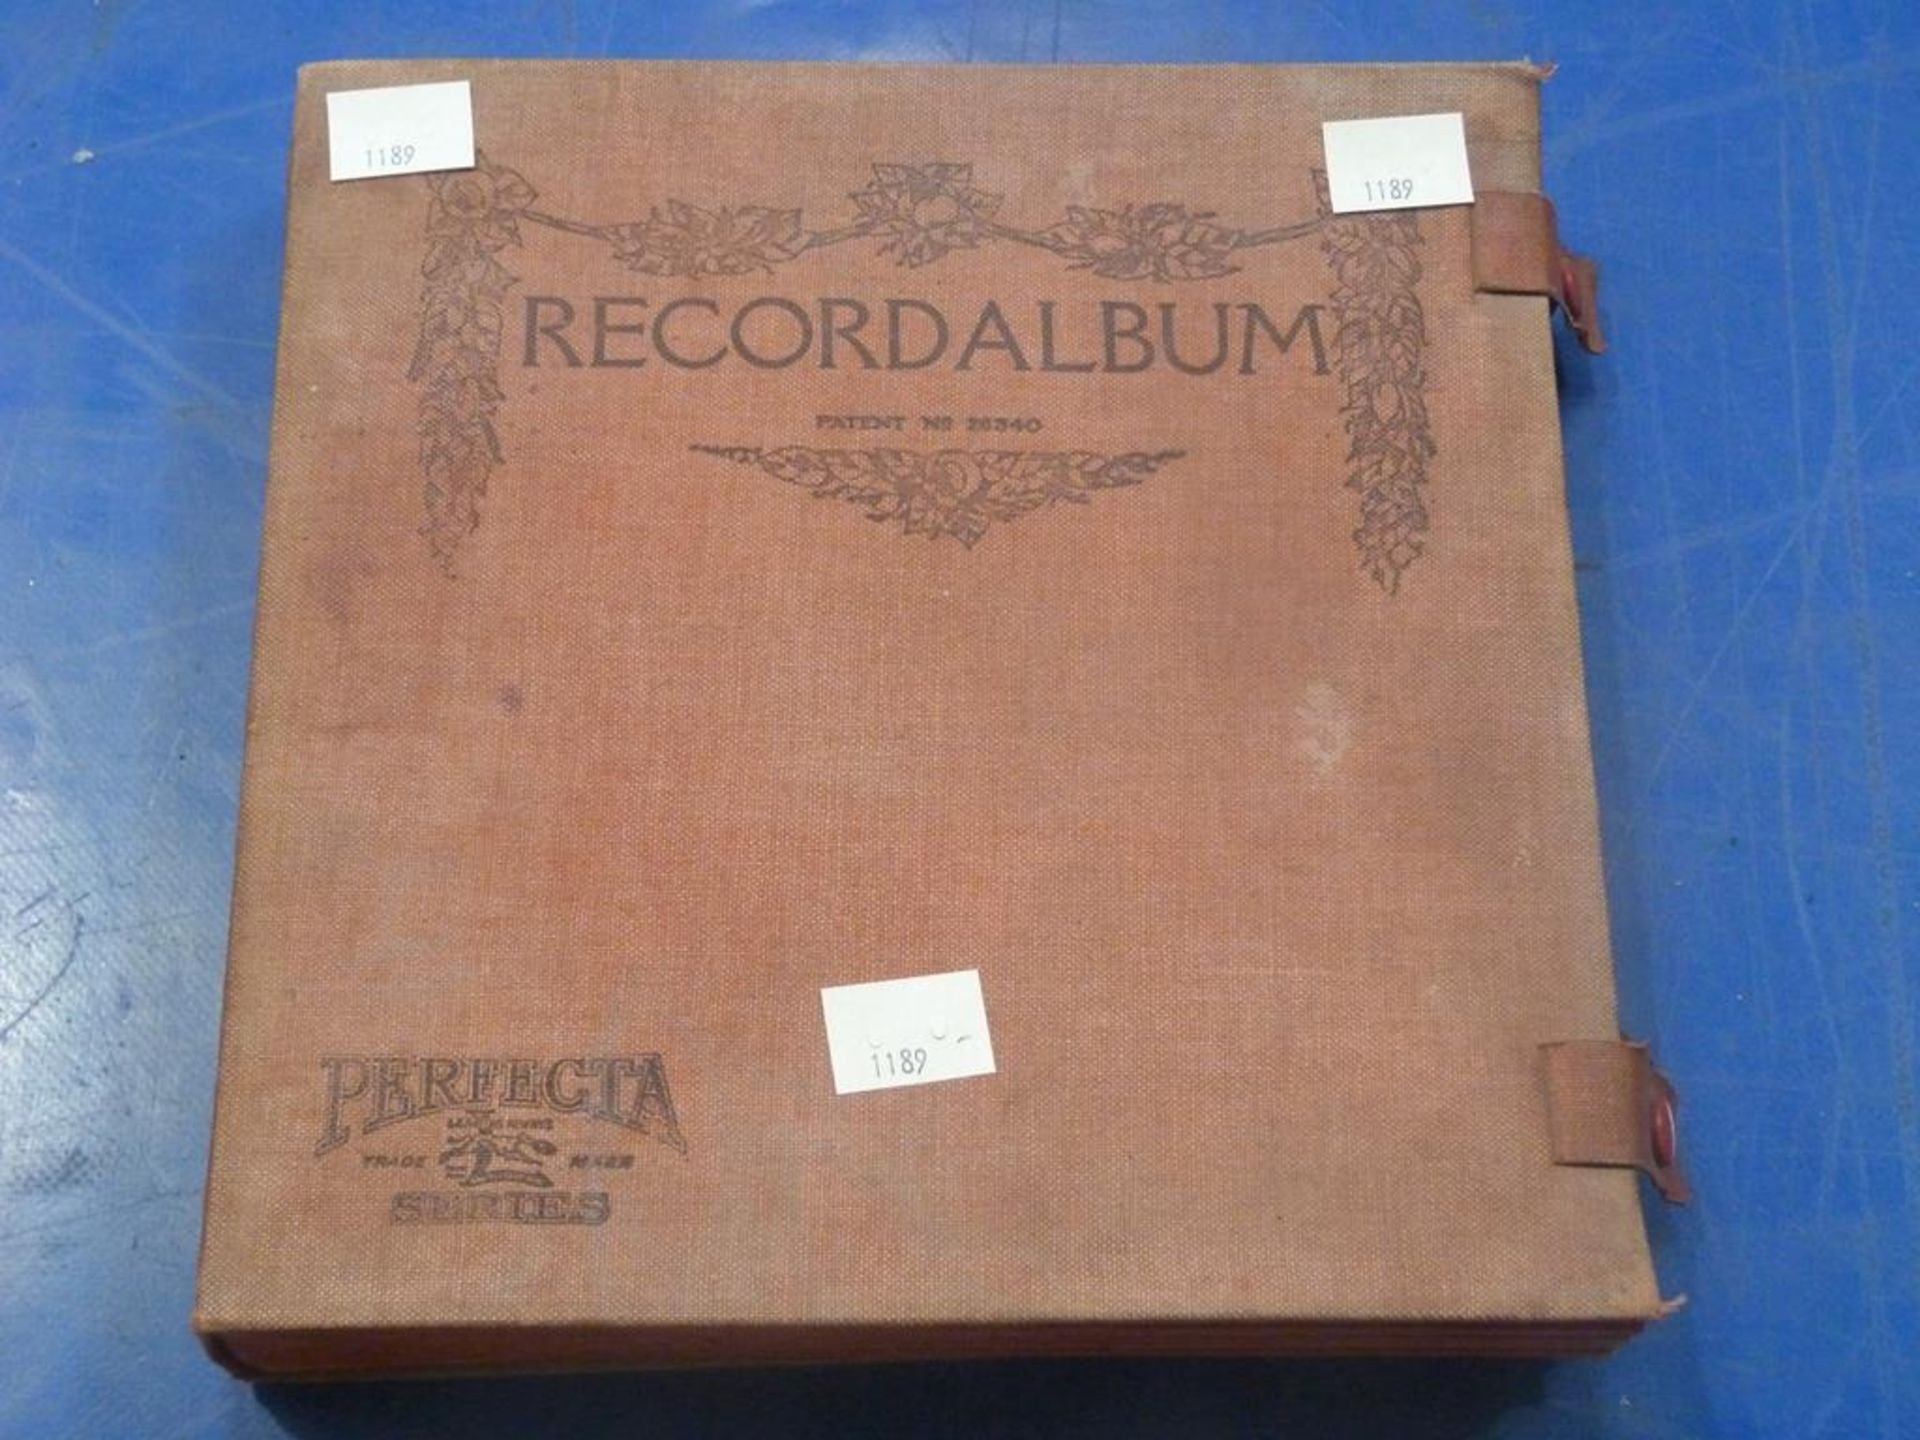 A Record Album featuring Records From 'Jack Hylton and His Orchestra', 'Beniamino Gigli', 'John